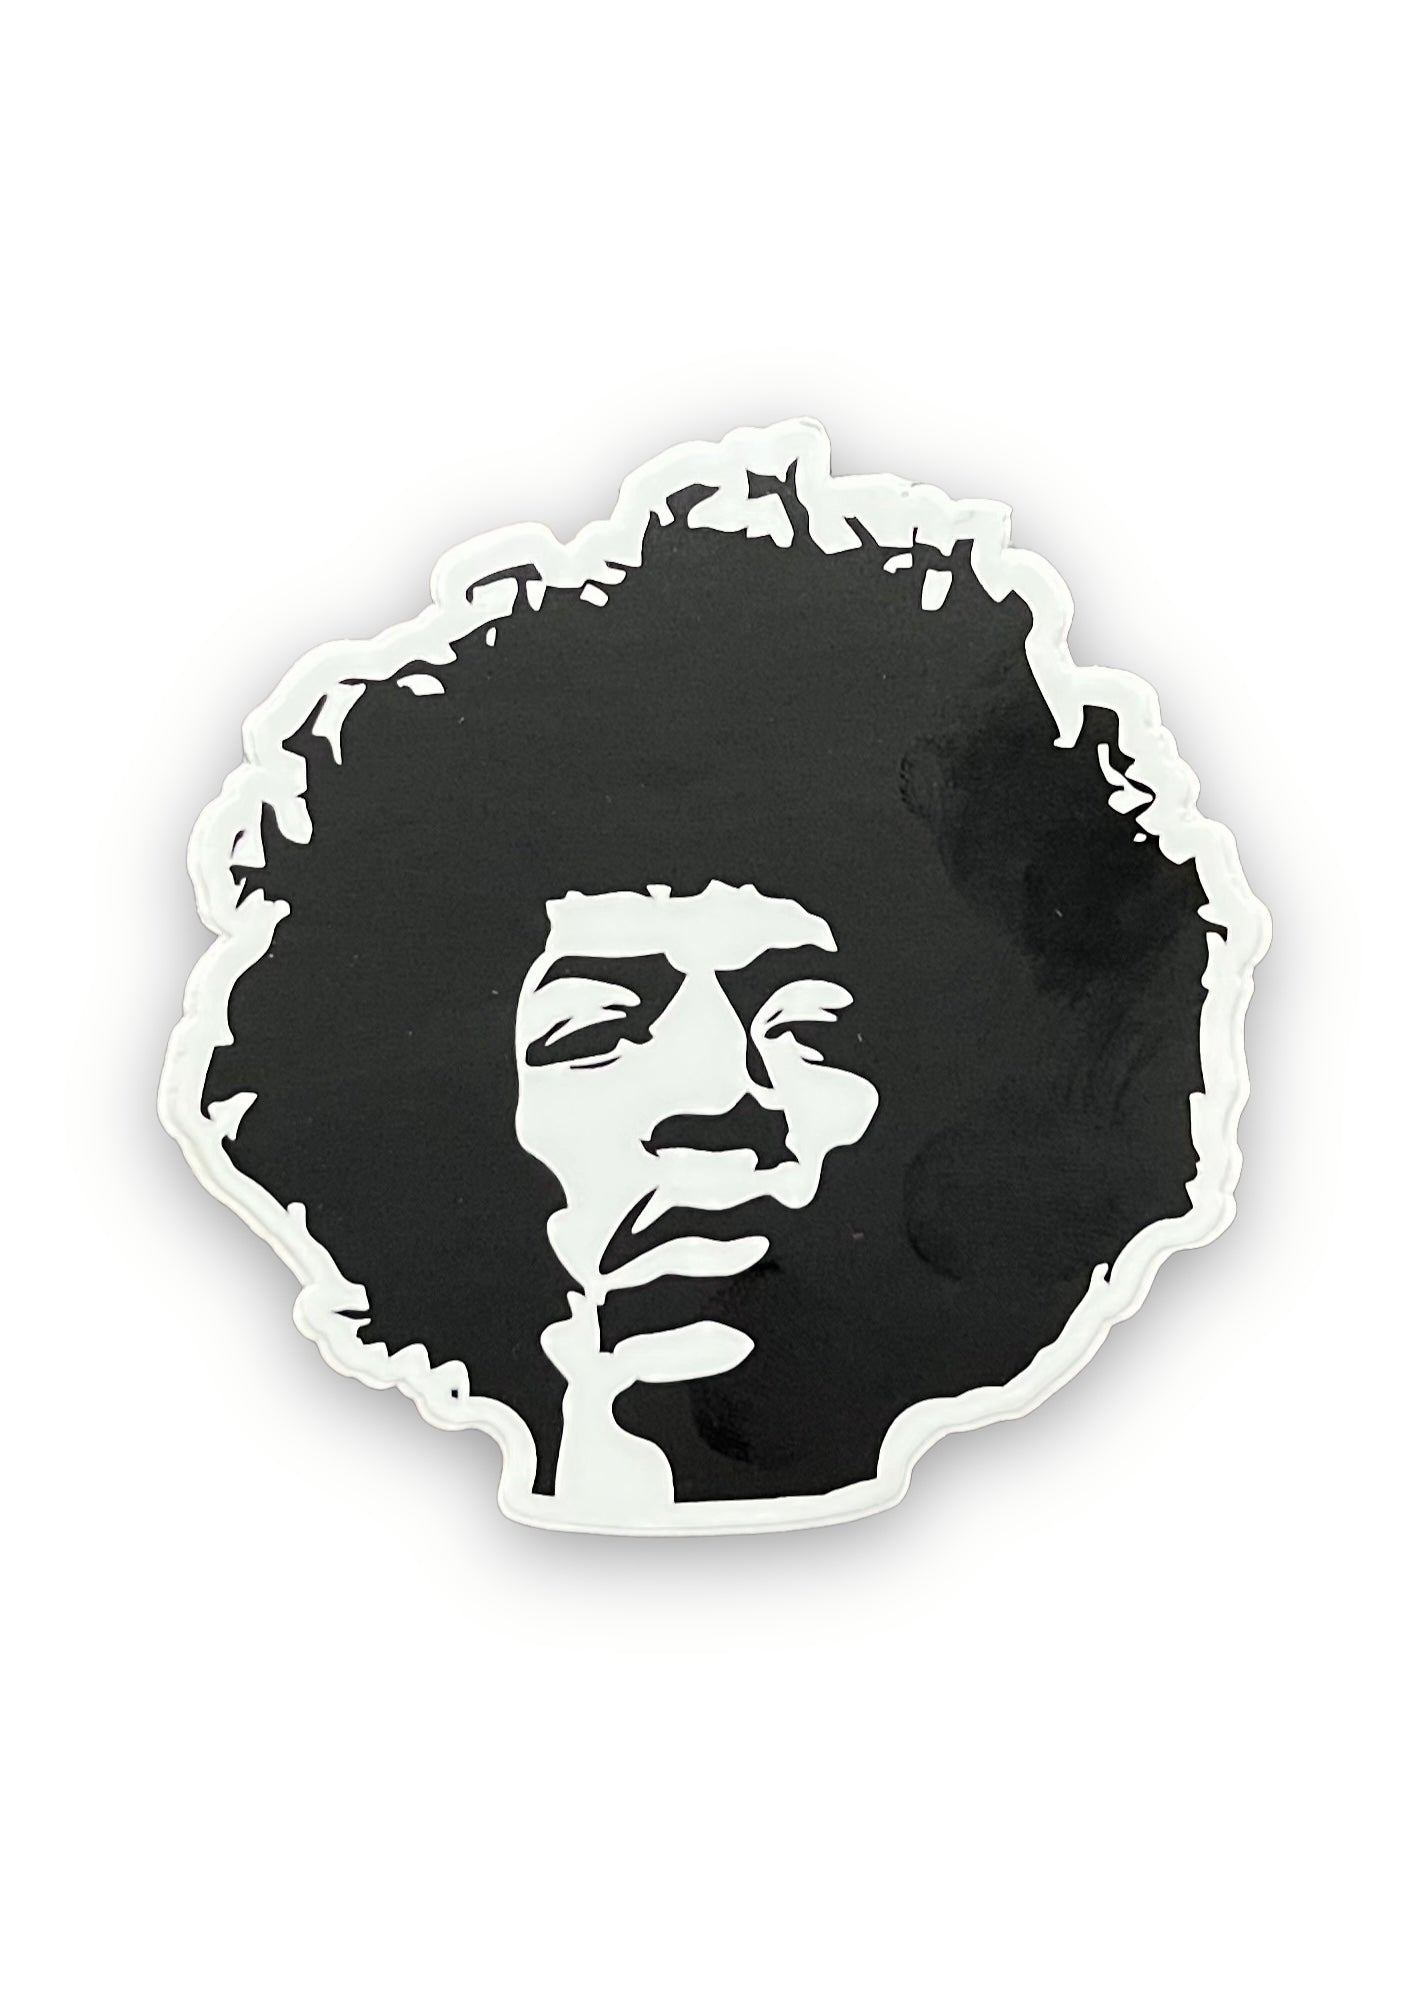 Jimi Hendrix waterproof, graphic sticker, by lettercraft Sold at Le Monkey House